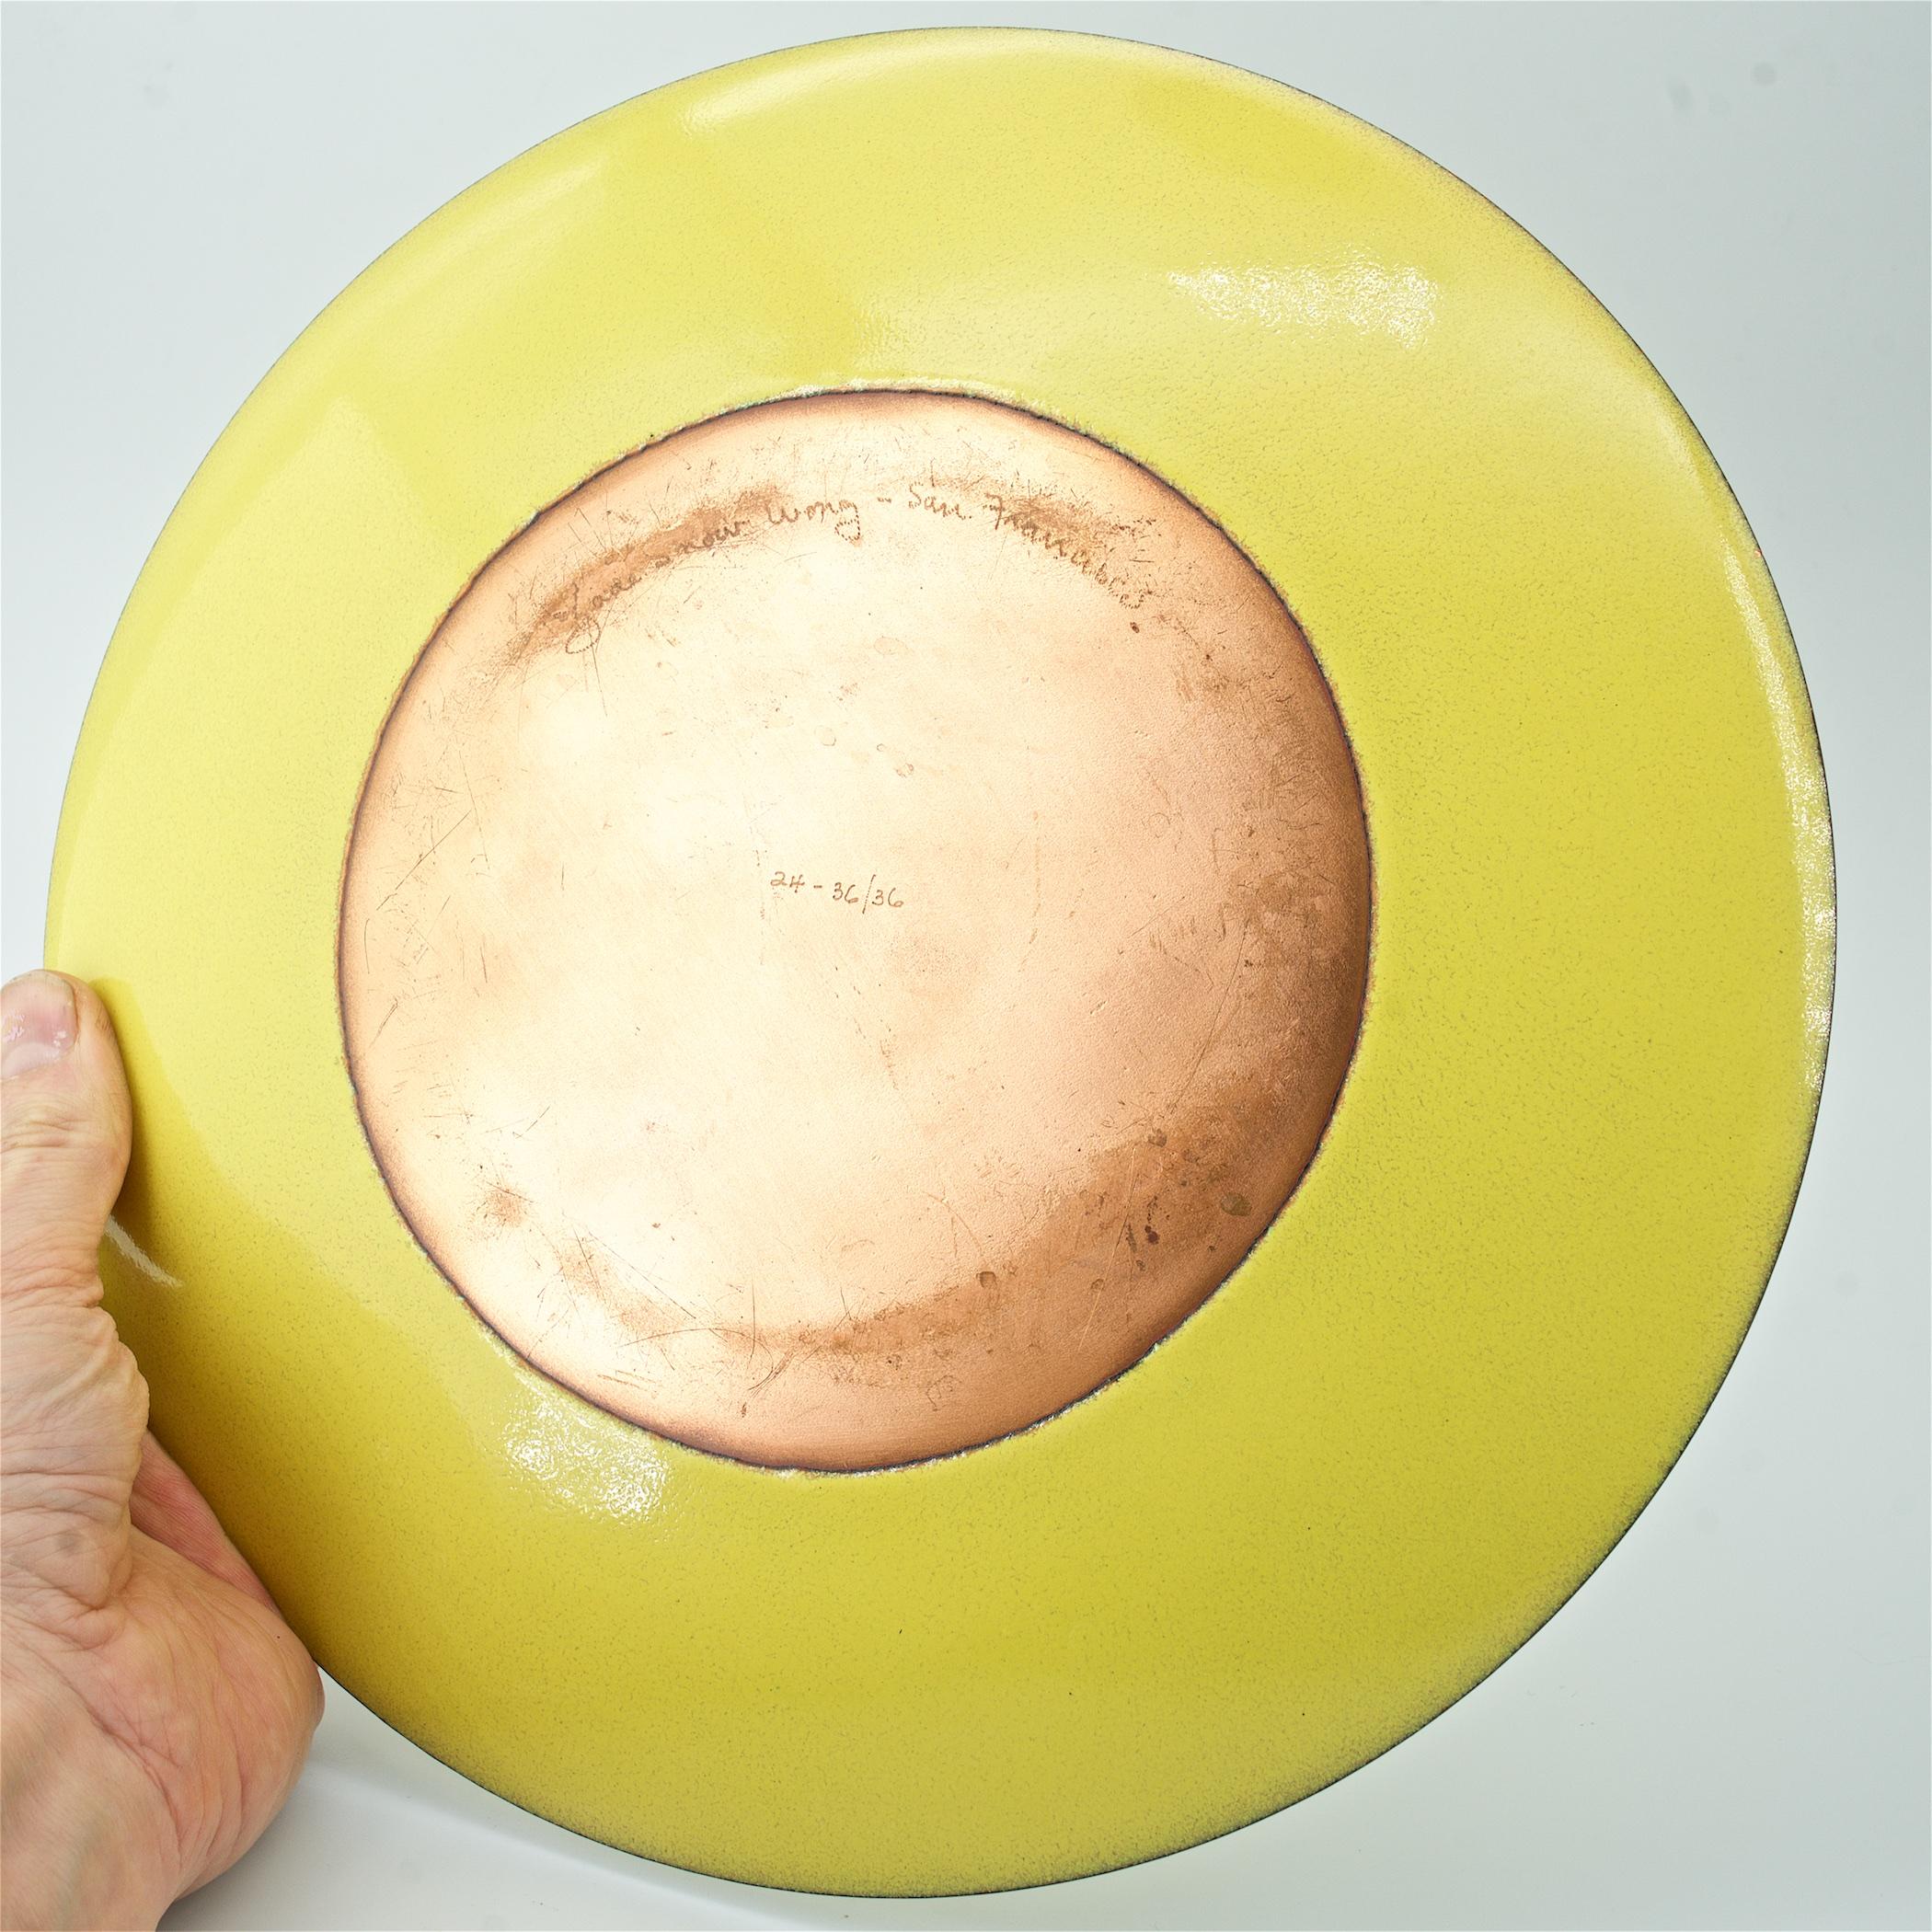 1950s Chinese Female Artist Jade Snow Wong Lemon Yellow Enameled Copper Bowl USA In Excellent Condition For Sale In Hyattsville, MD